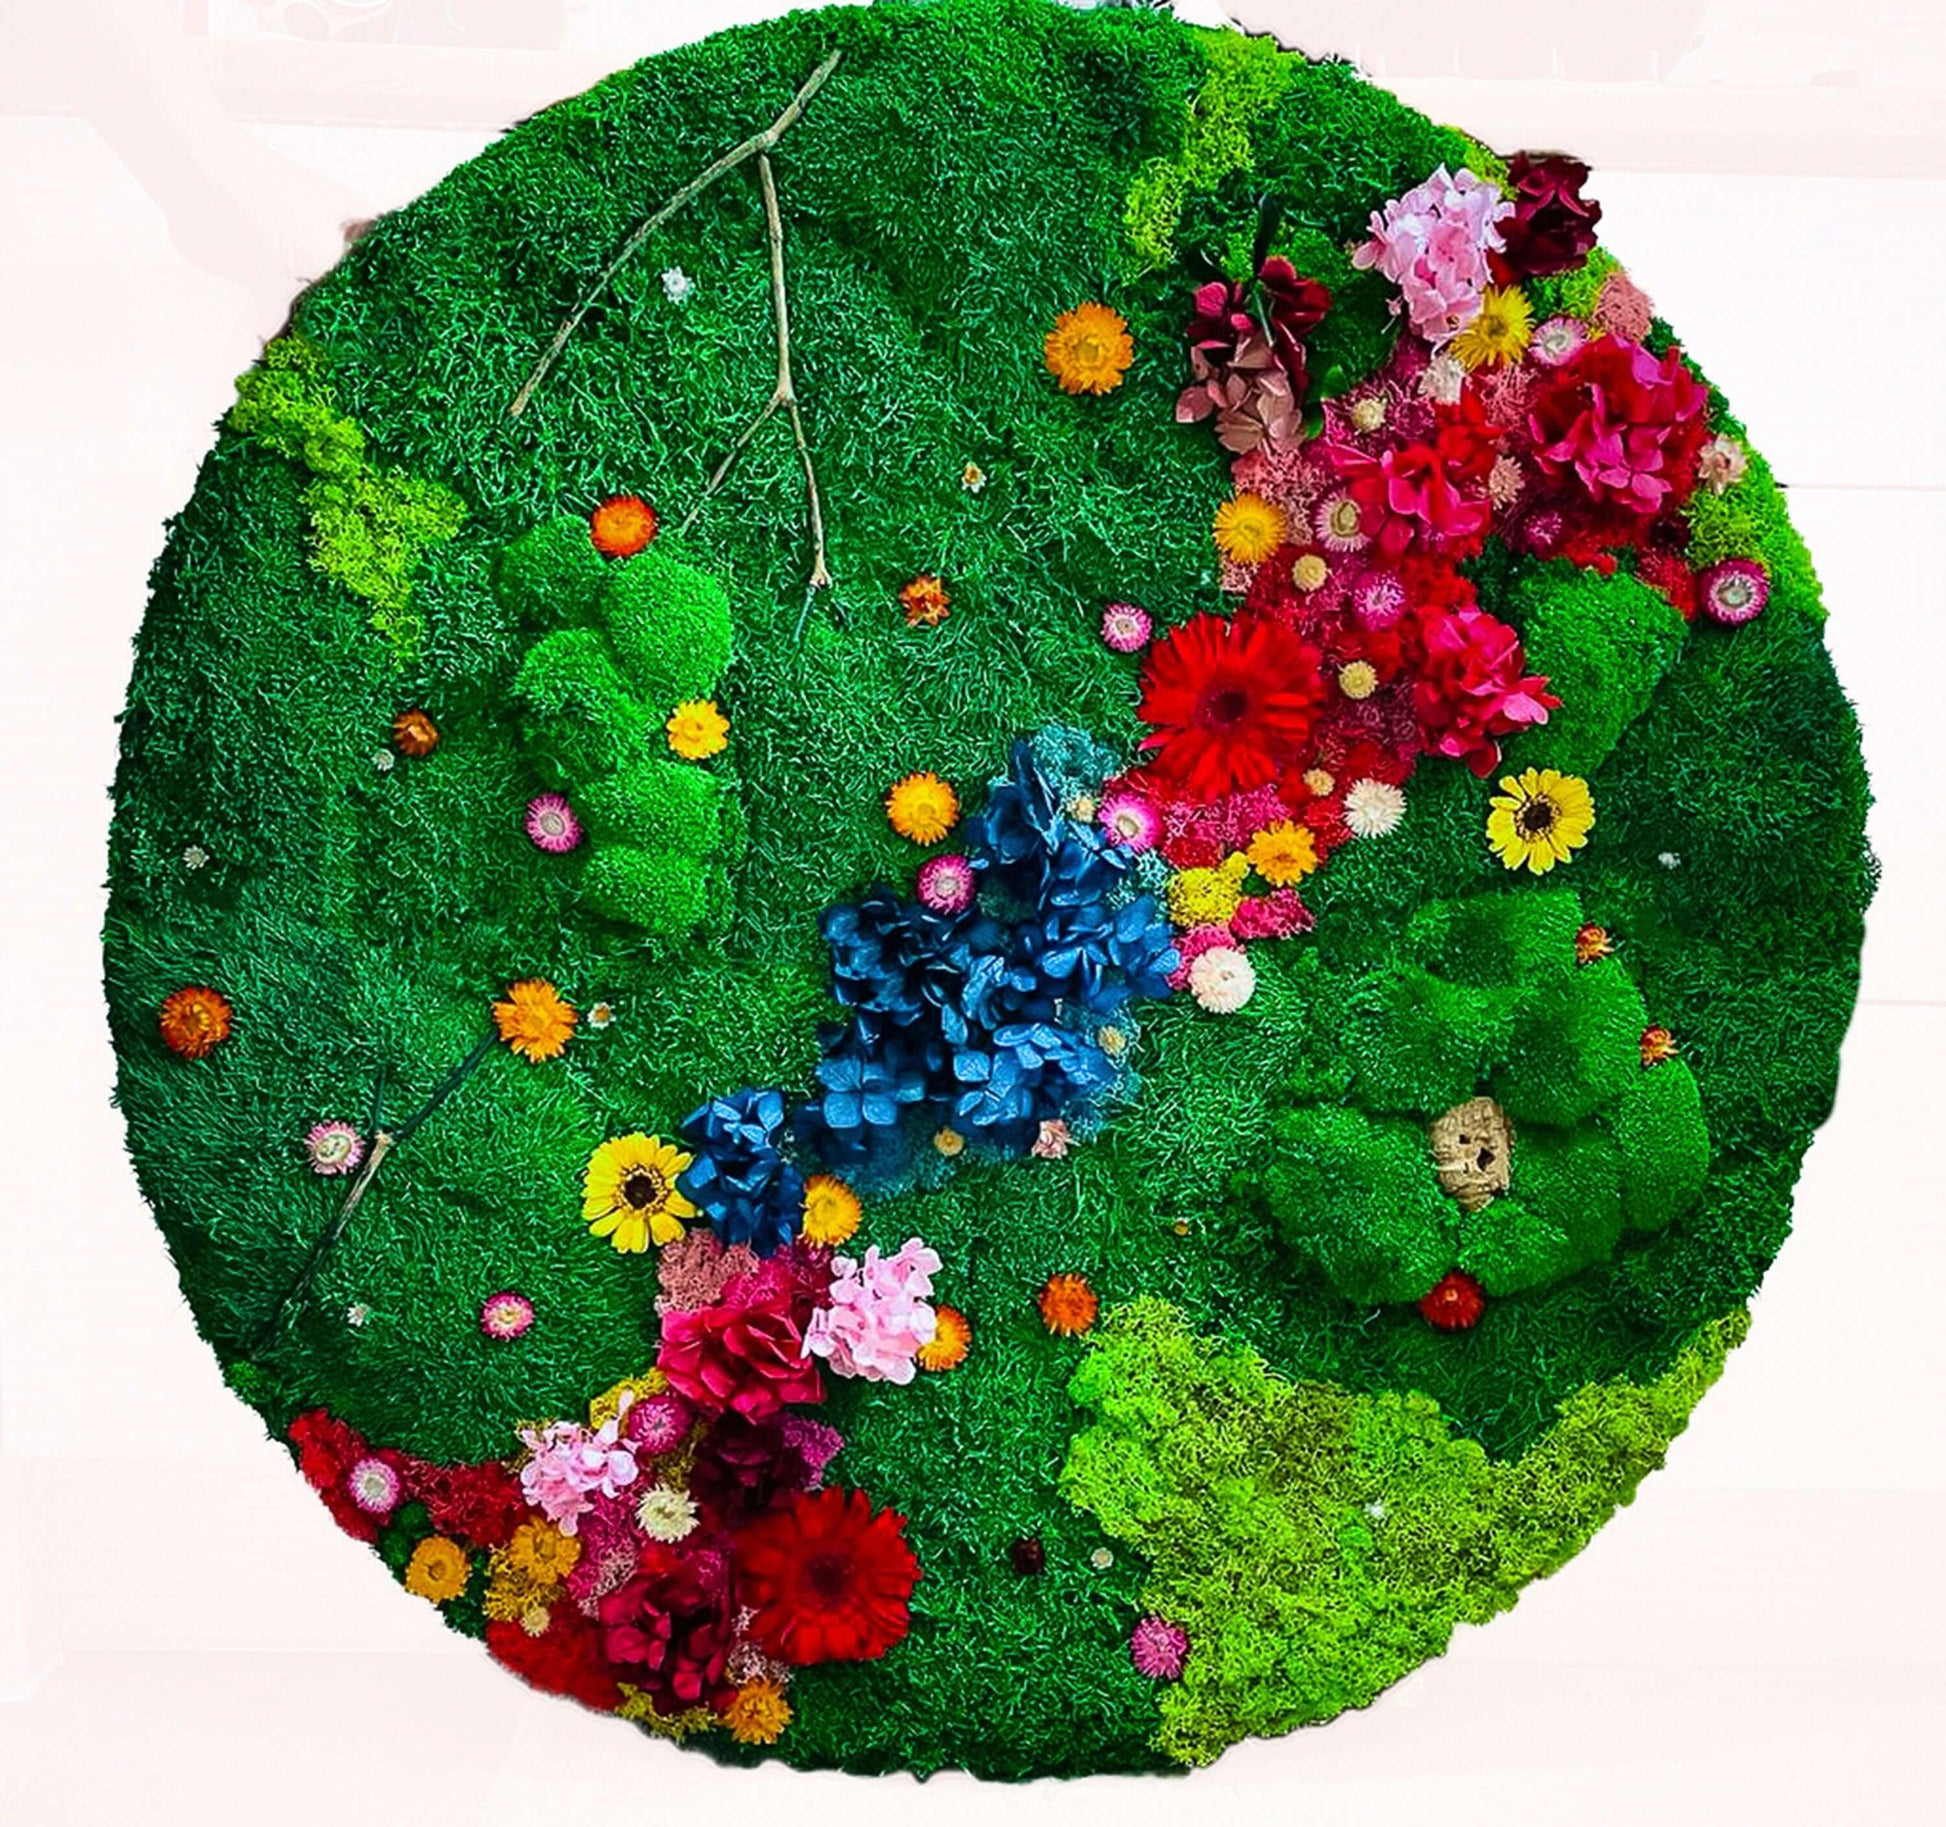 Preserved Moss wall with colorful lichen and dried flower mossartbyrishstudio